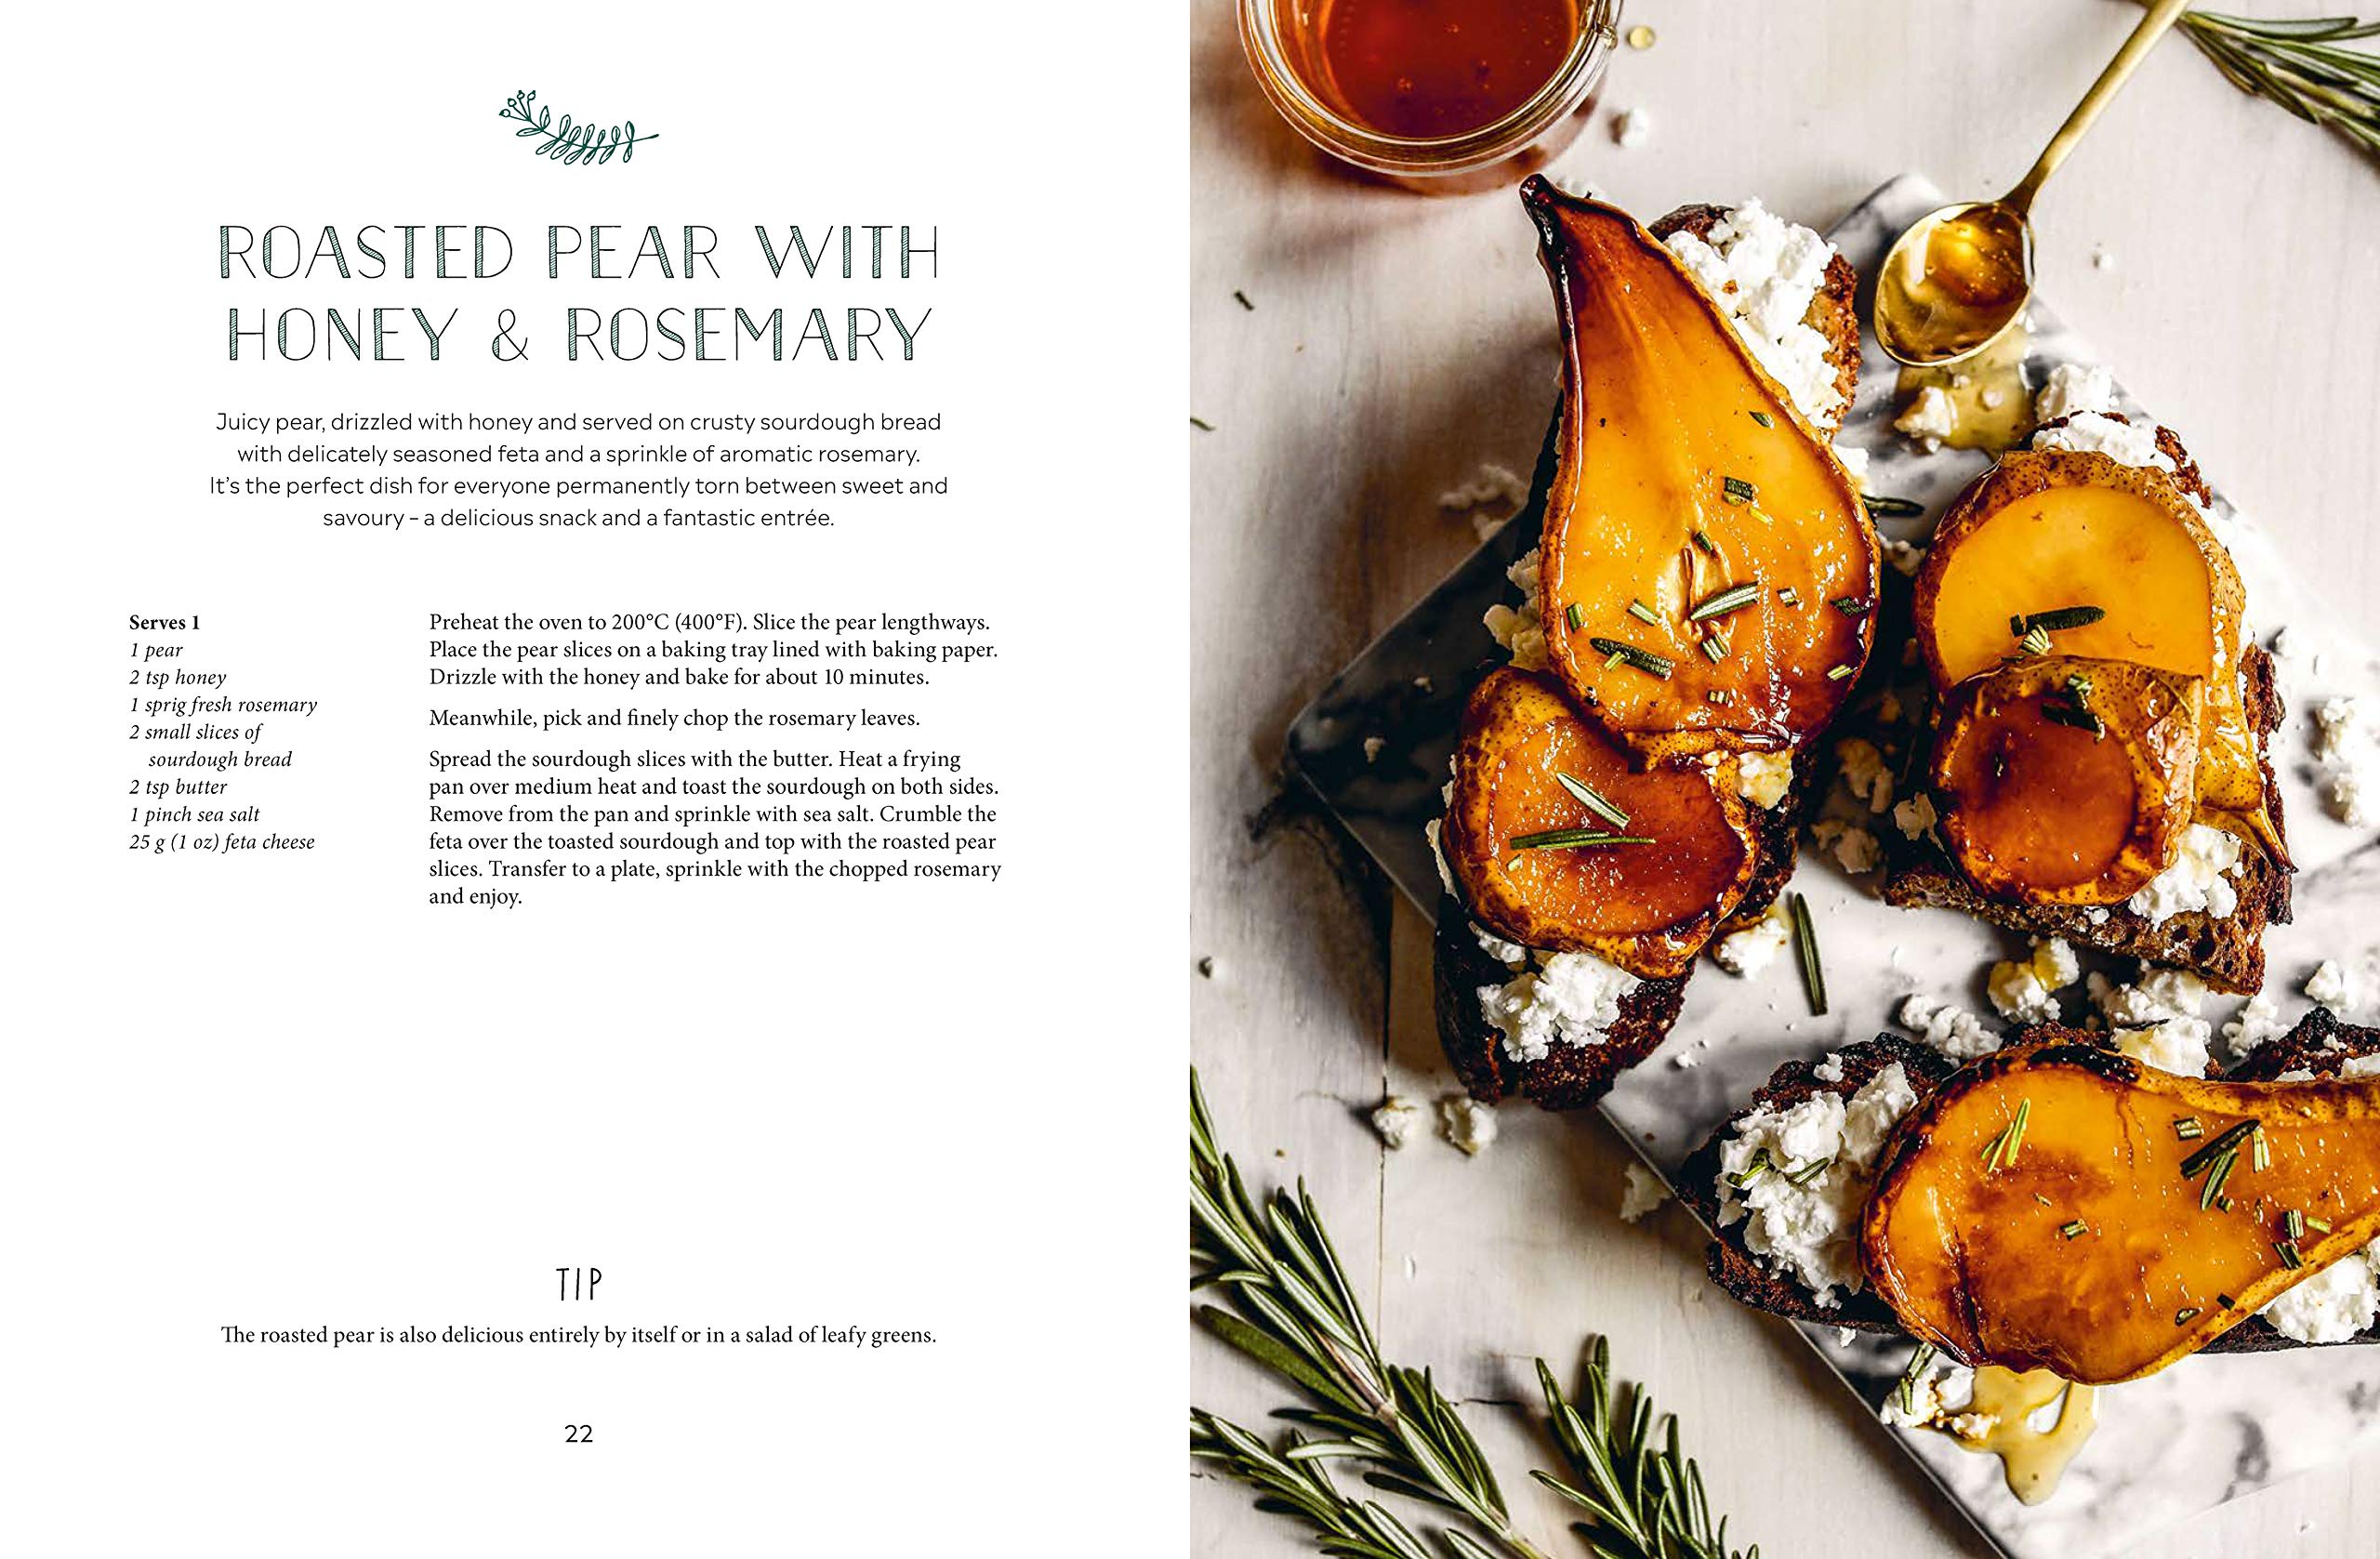 Roasted Pear With Honey & Rosemary - Advent Recipes and Crafts